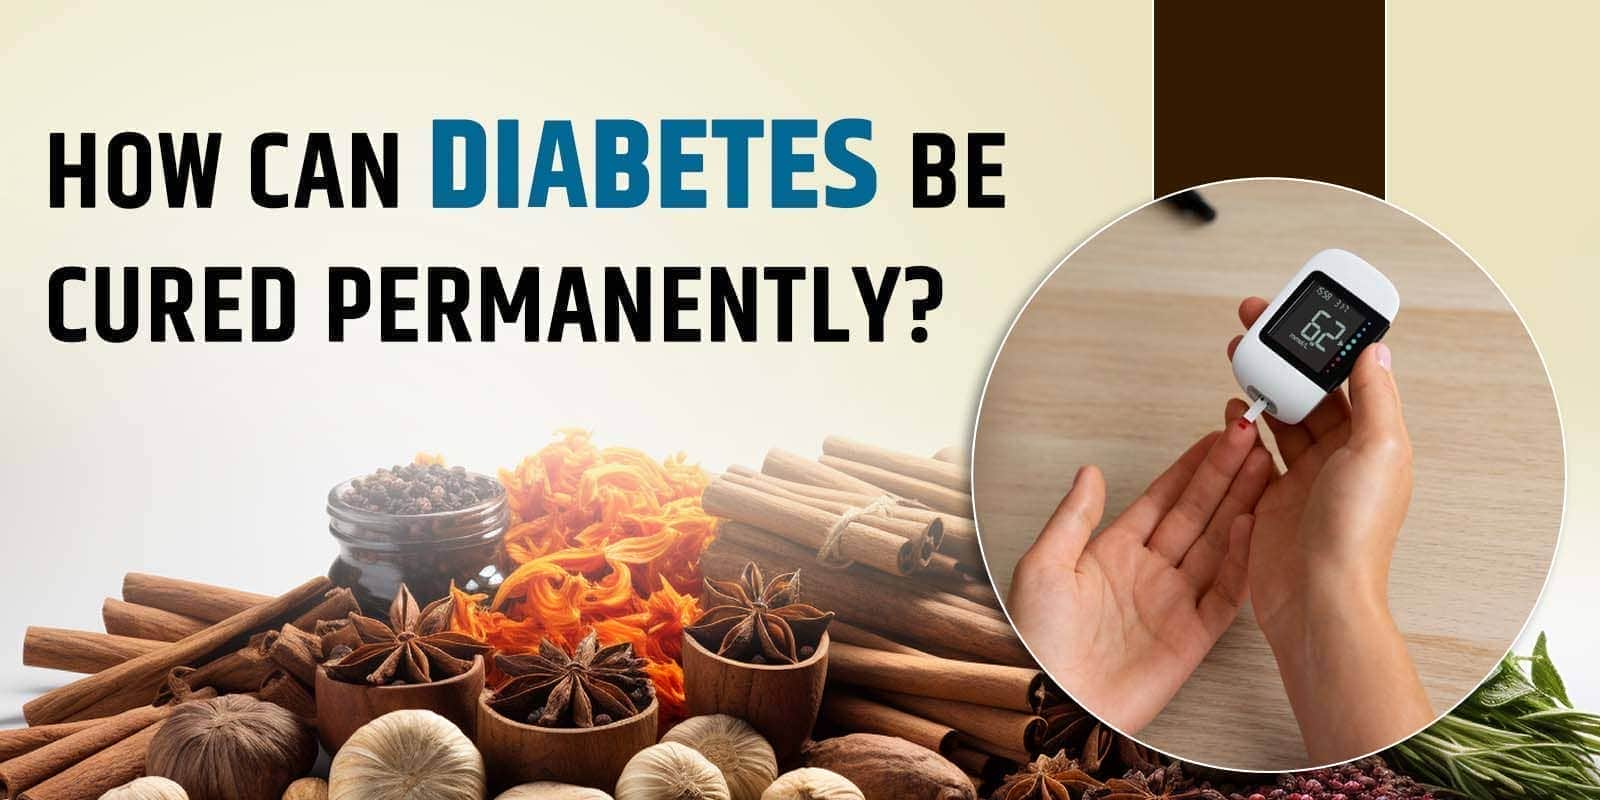 How Can Diabetes be Cured Permanently?